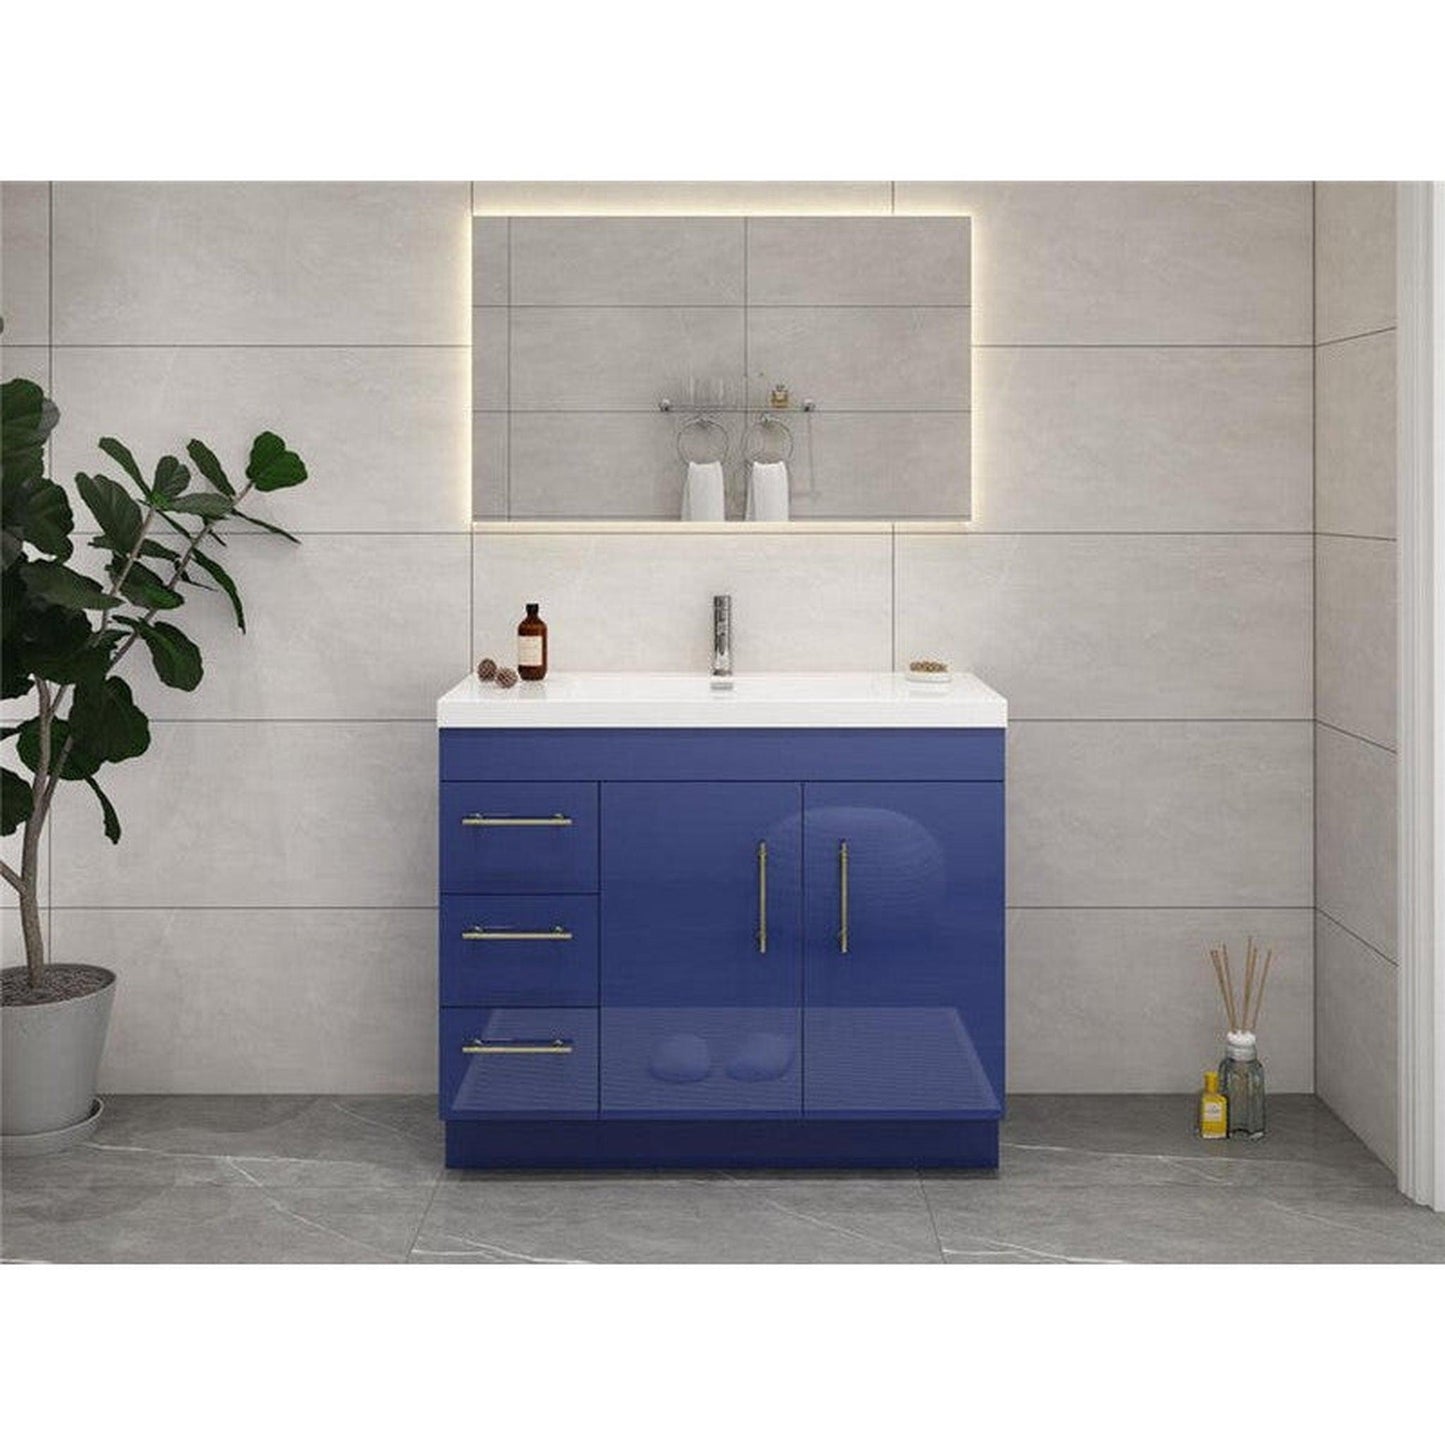 Moreno Bath ELSA 42" High Gloss Night Blue Freestanding Vanity With Left Side Drawers and Single Reinforced White Acrylic Sink